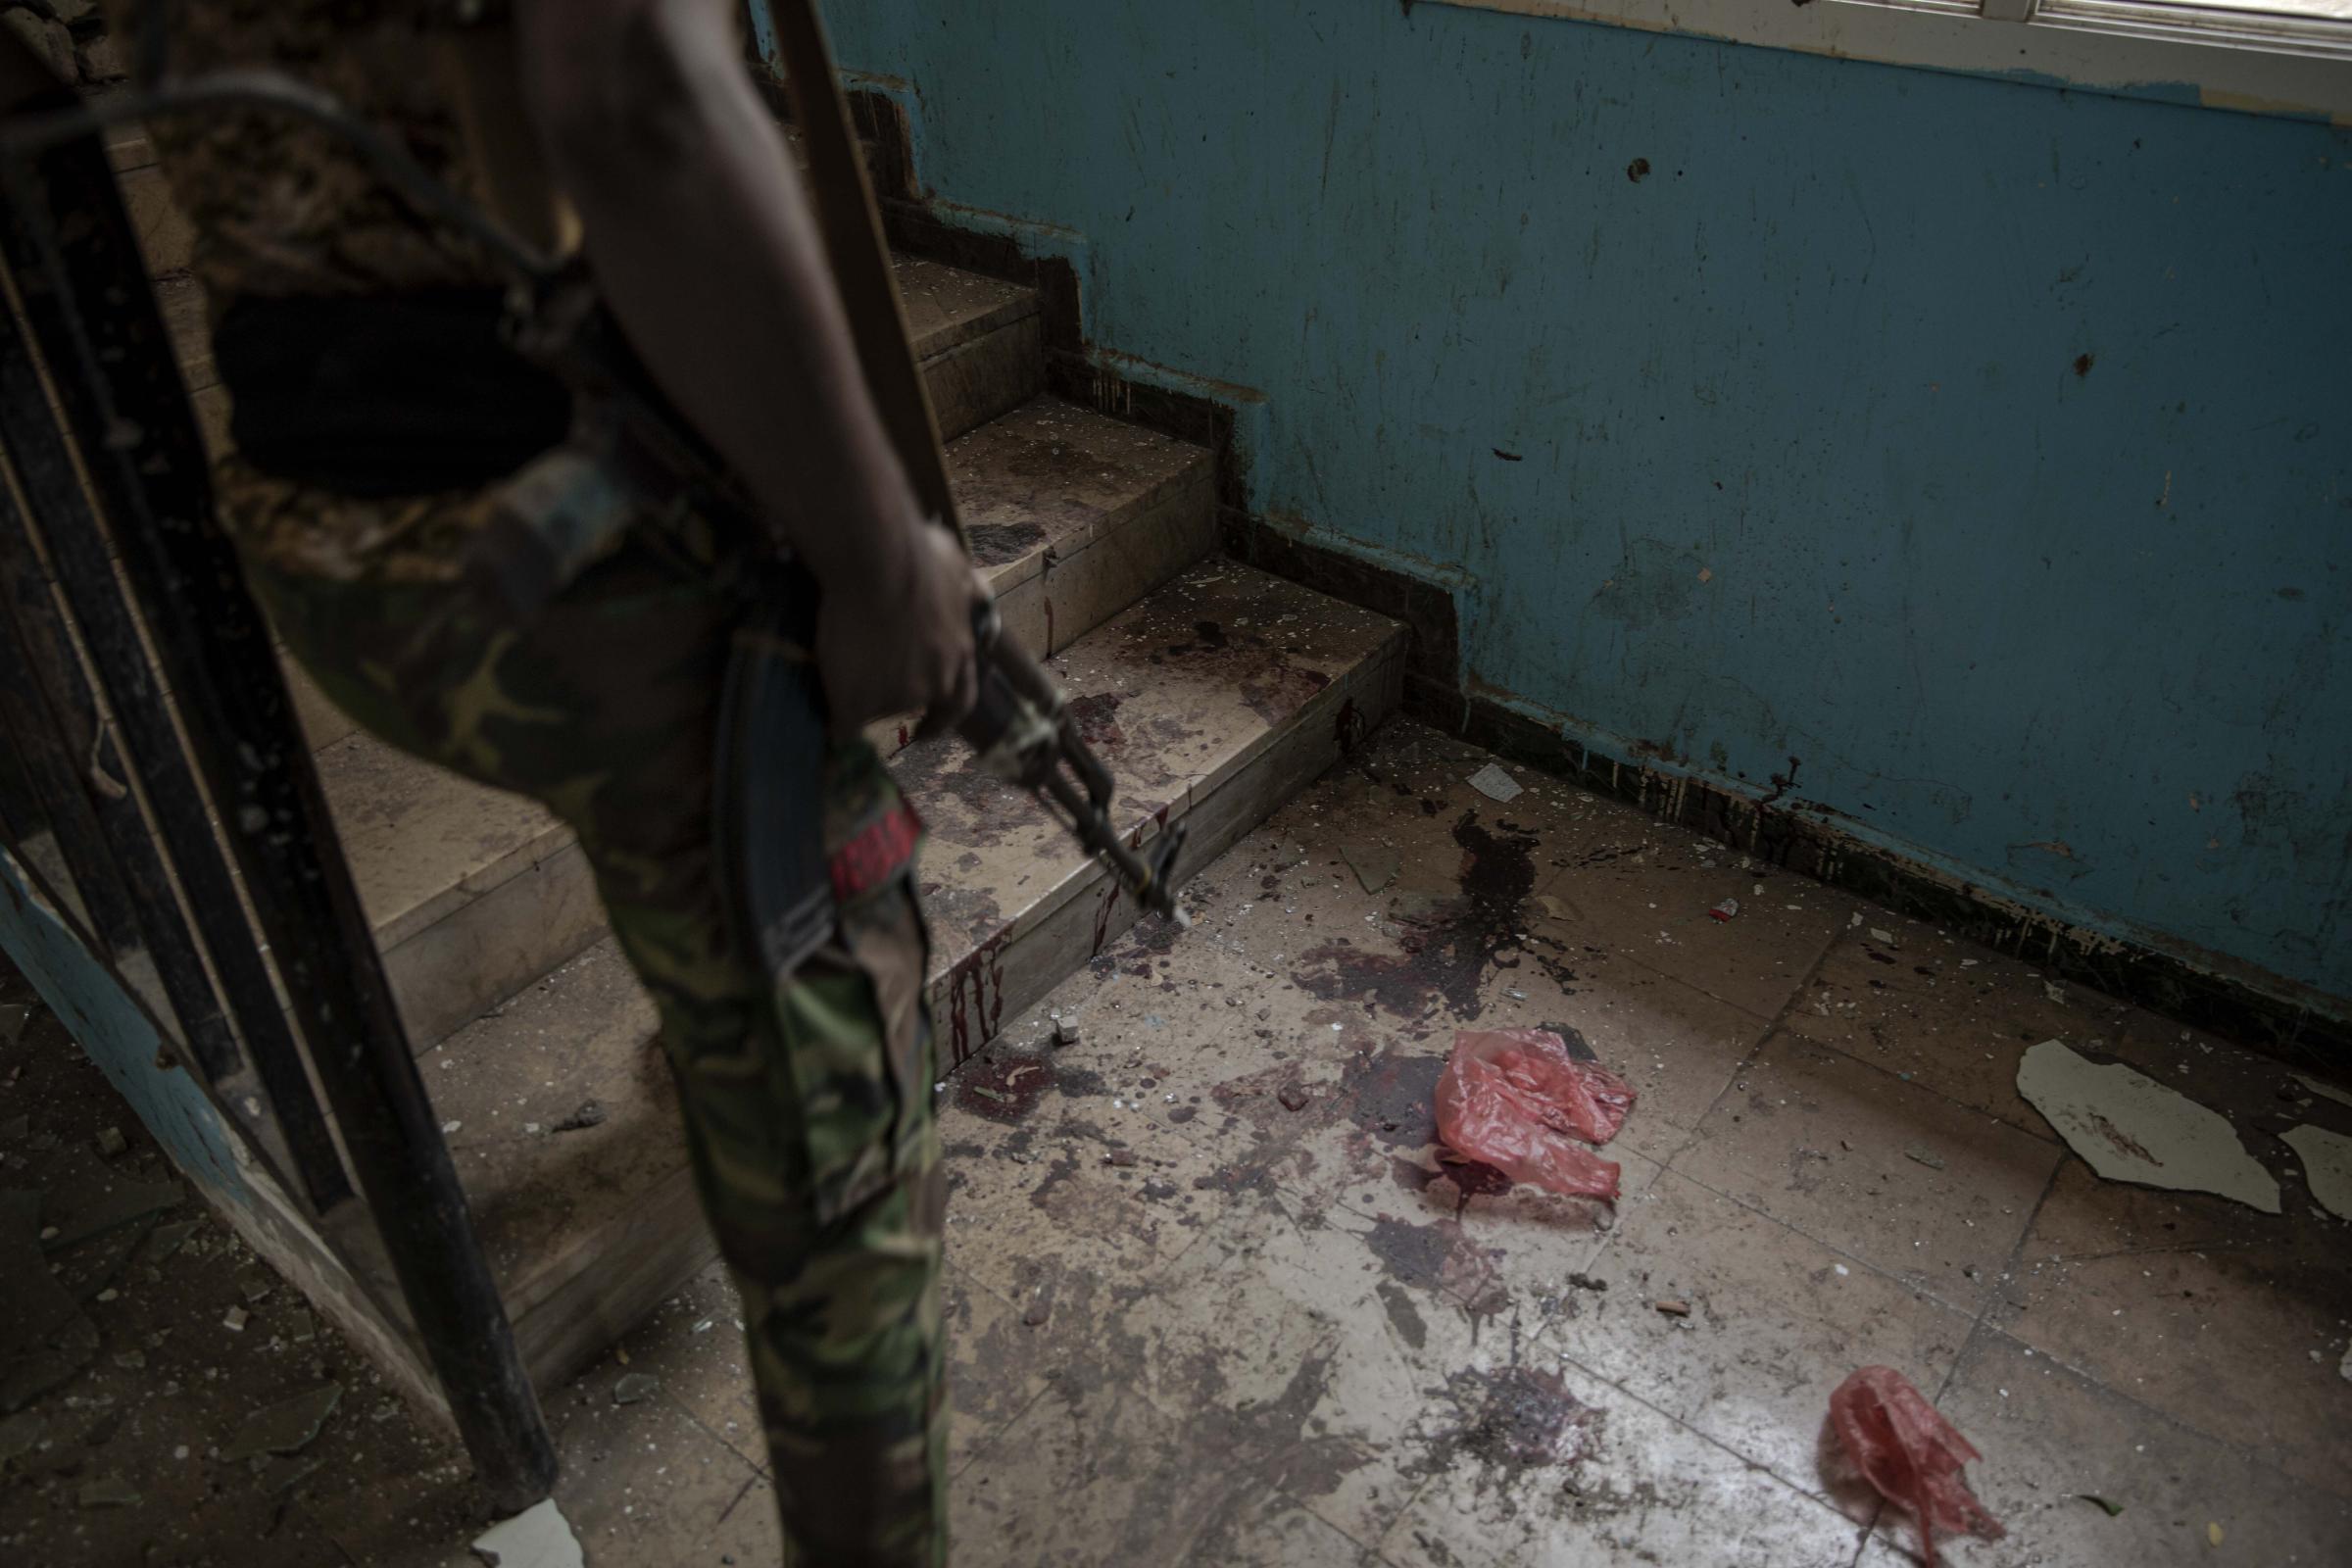  A solider walks past blood after a deadly attack on the Sheikh Othman police station. 